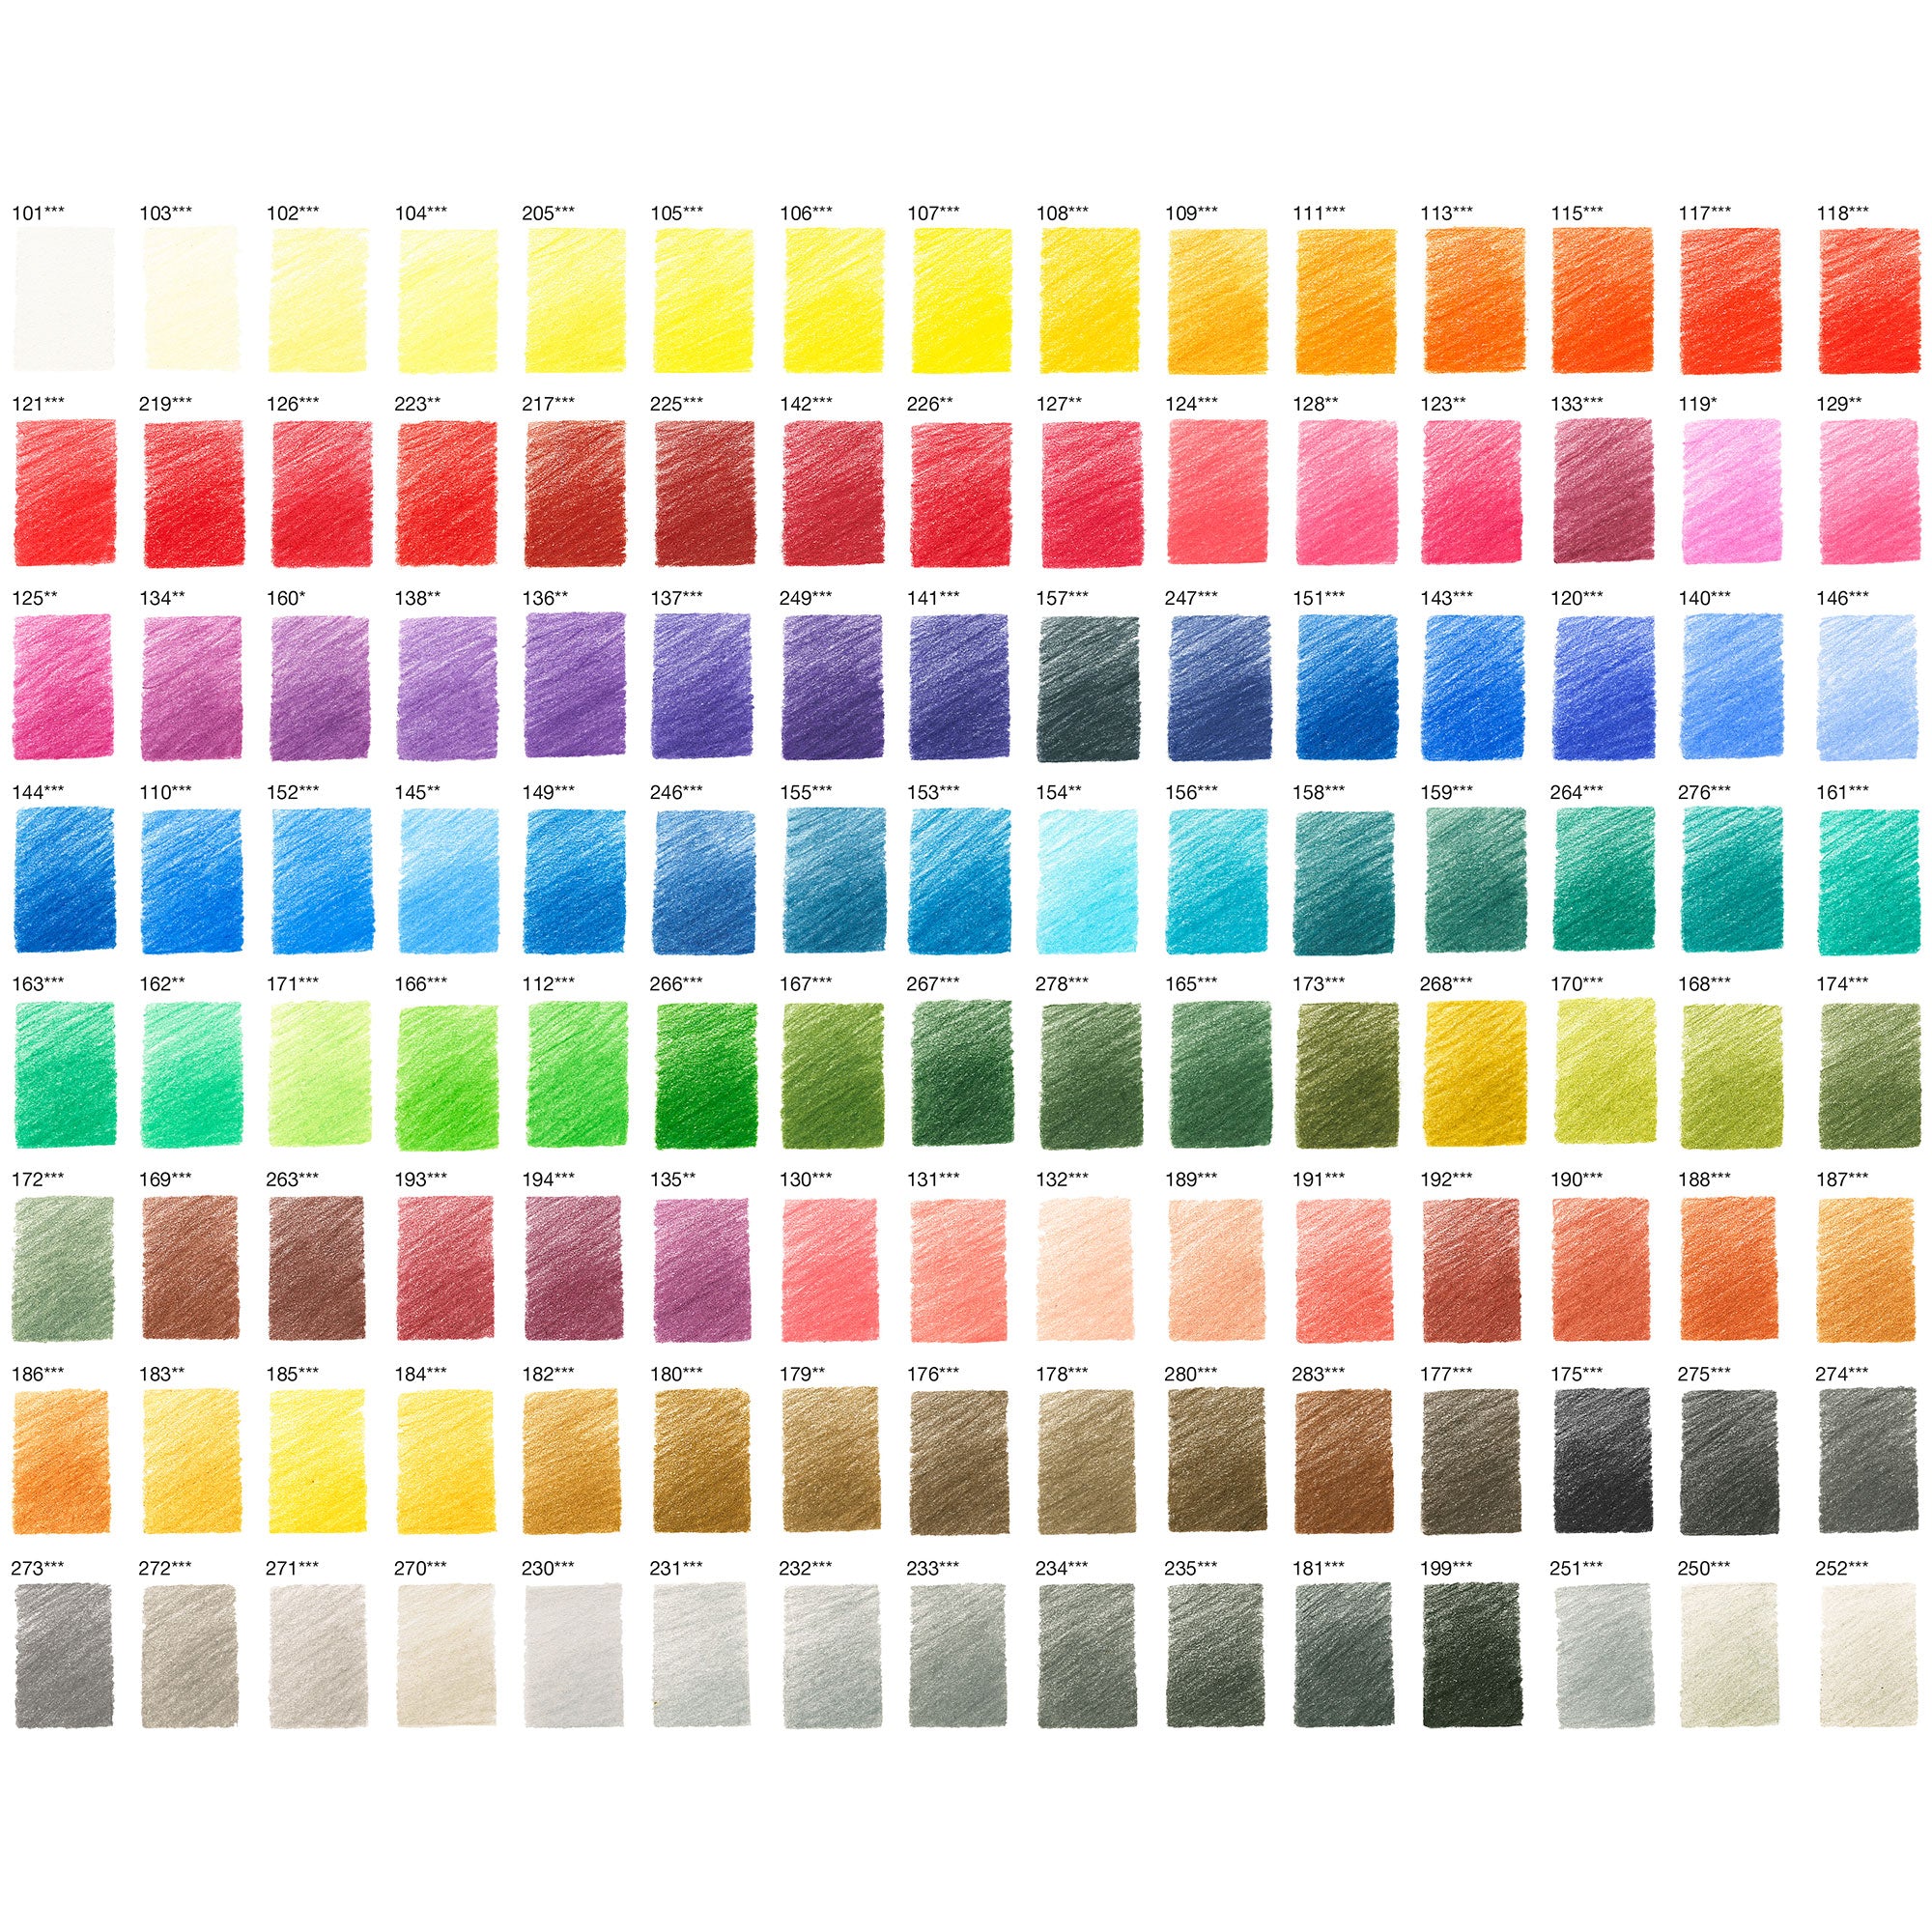 Faber-Castell Polychromos Set of 120 - Colour Swatches